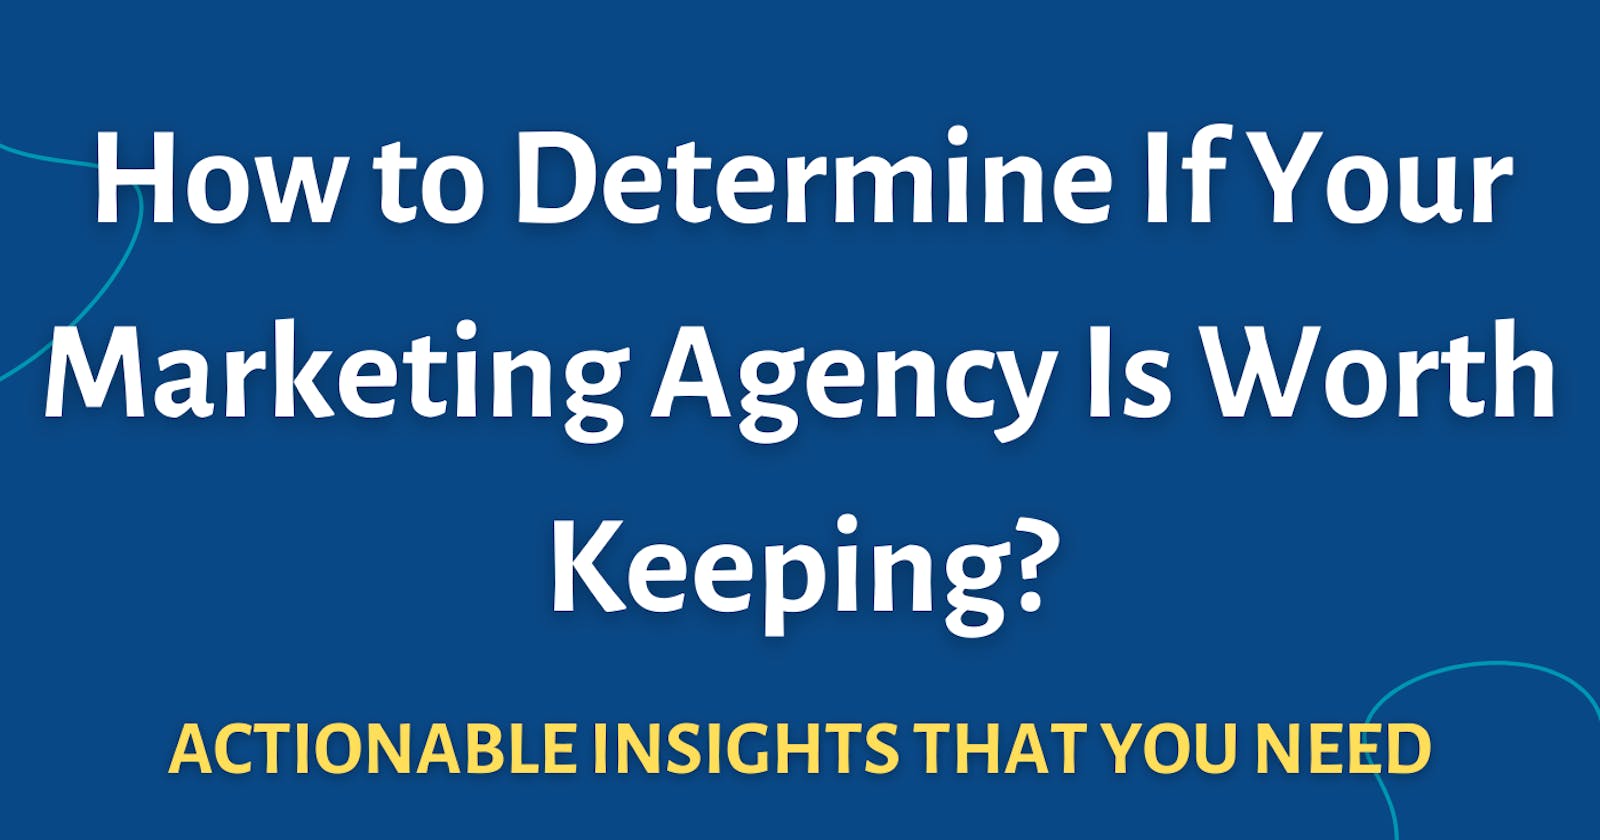 How to Determine If Your Marketing Agency Is Worth Keeping?